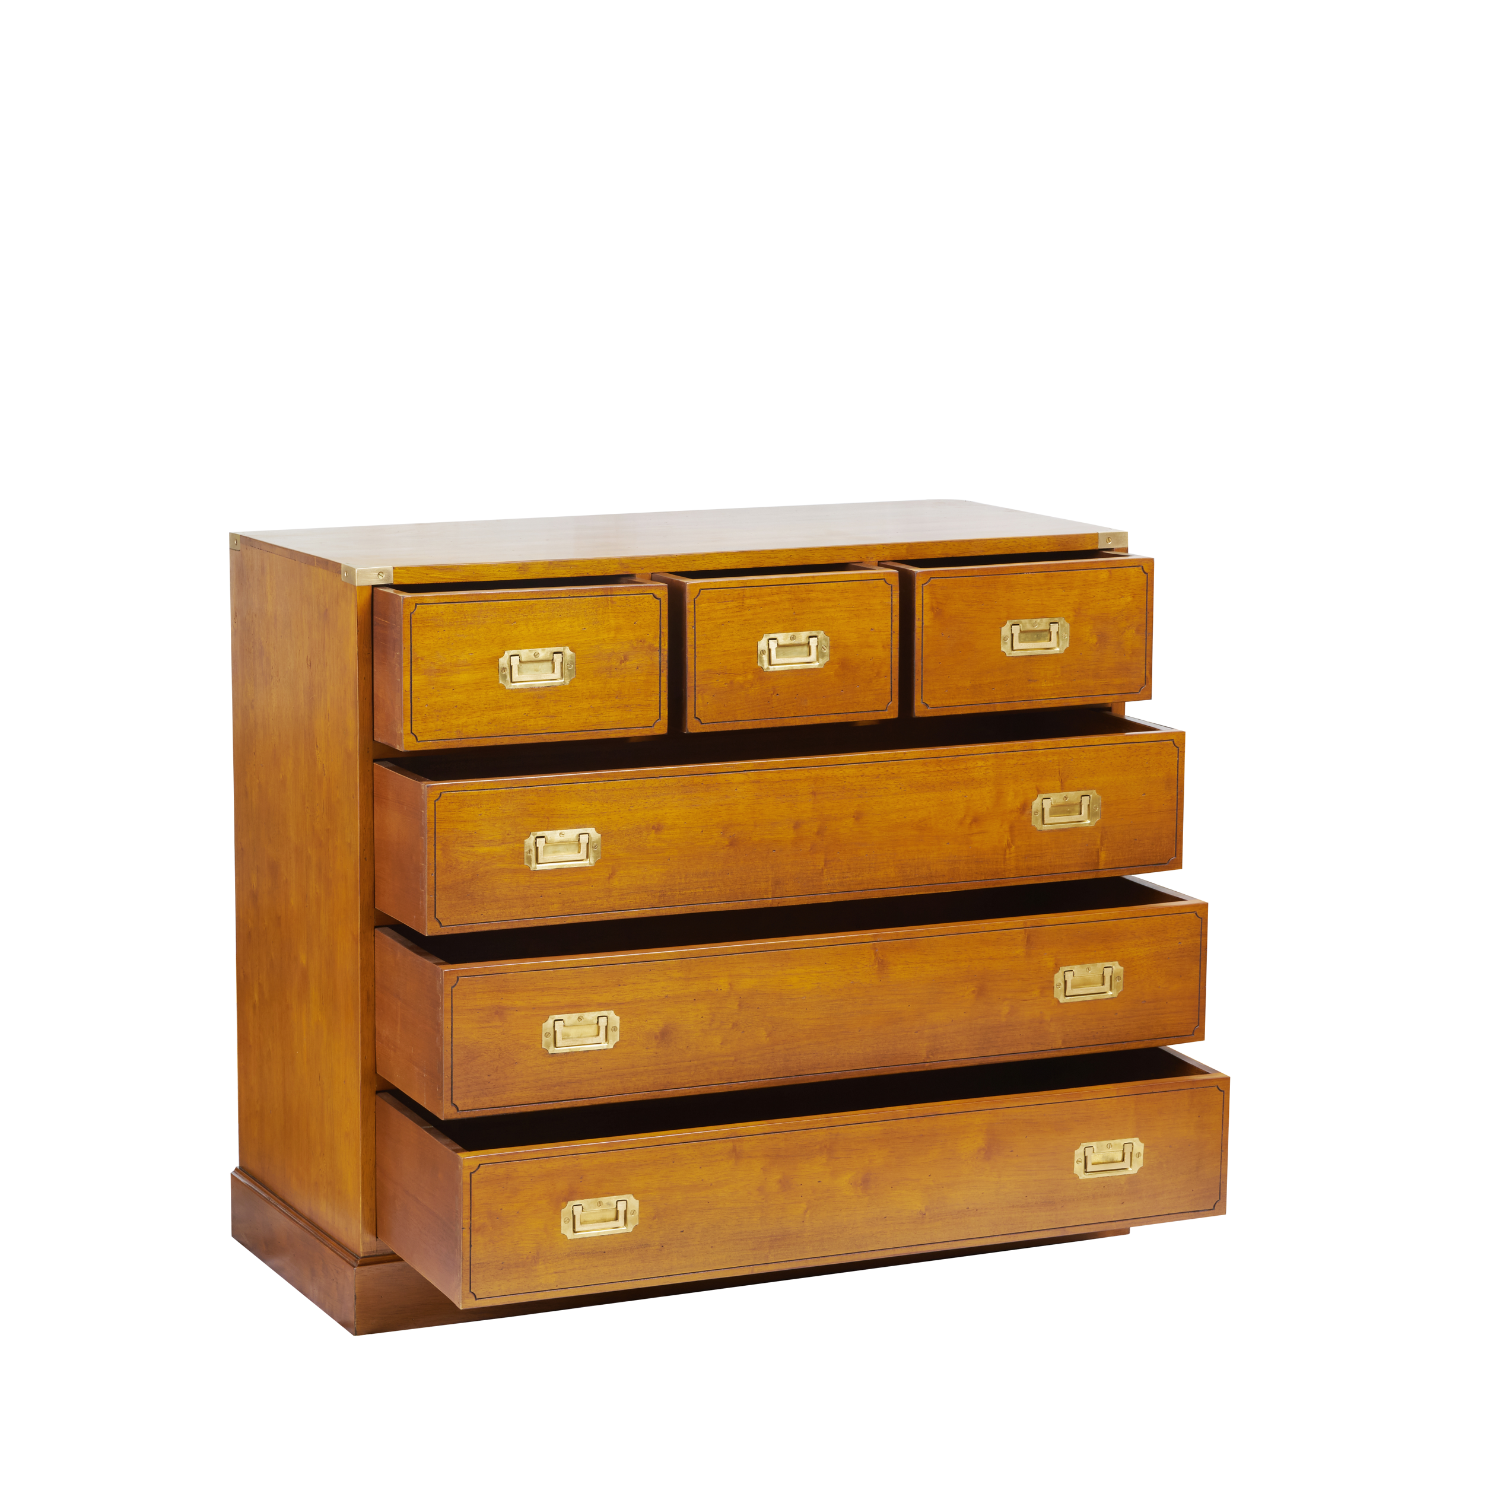 GLASGOW LARGE CHEST OF DRAWERS